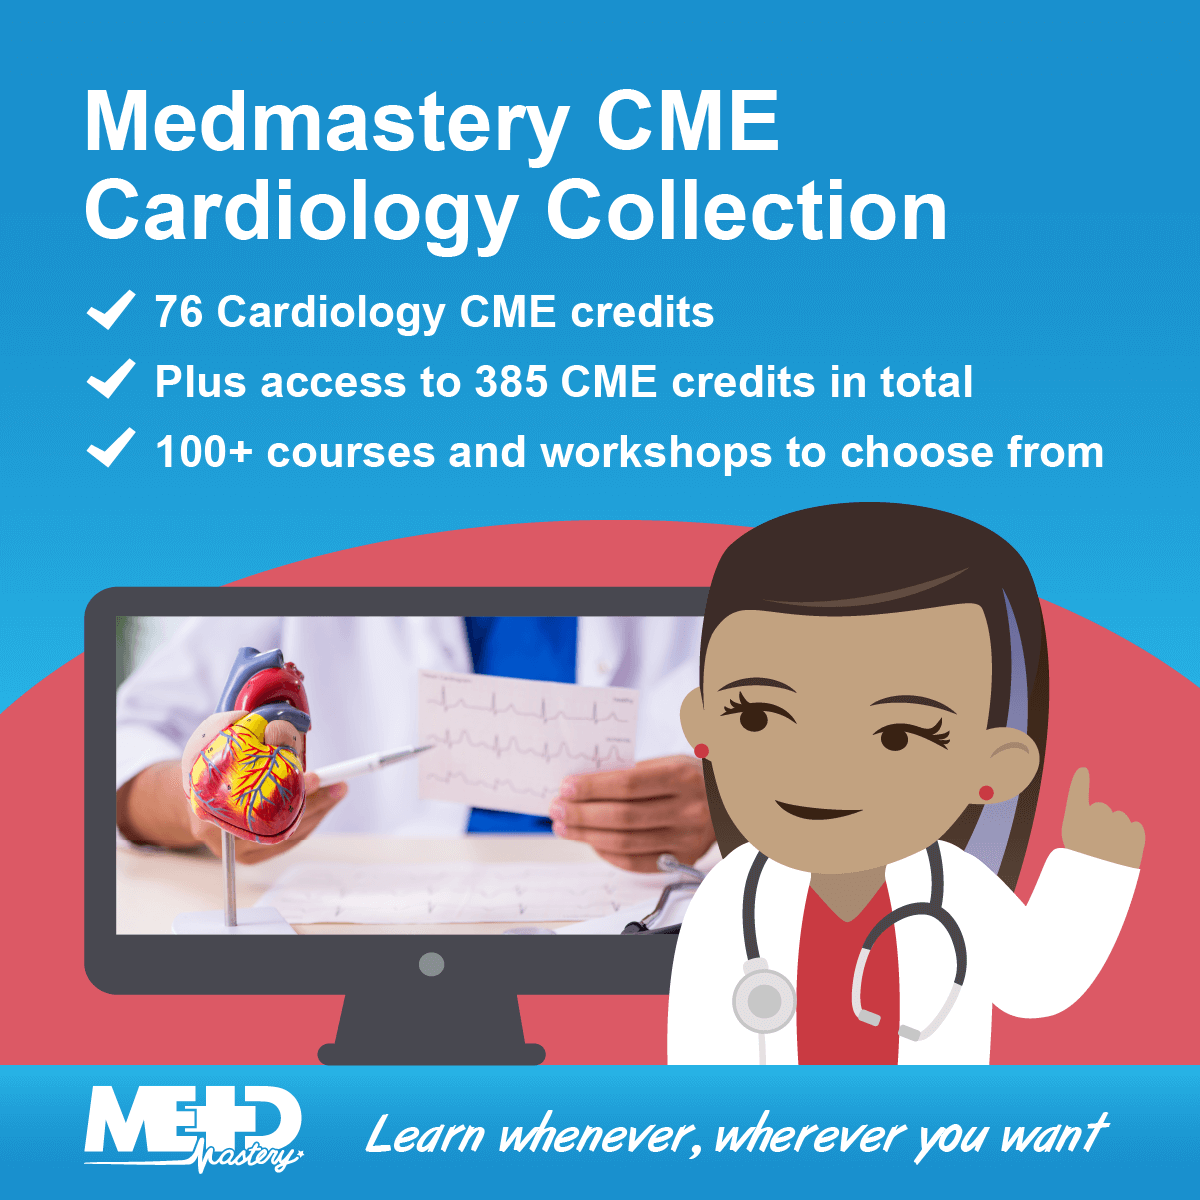 Medmastery CME Cardiology Collection